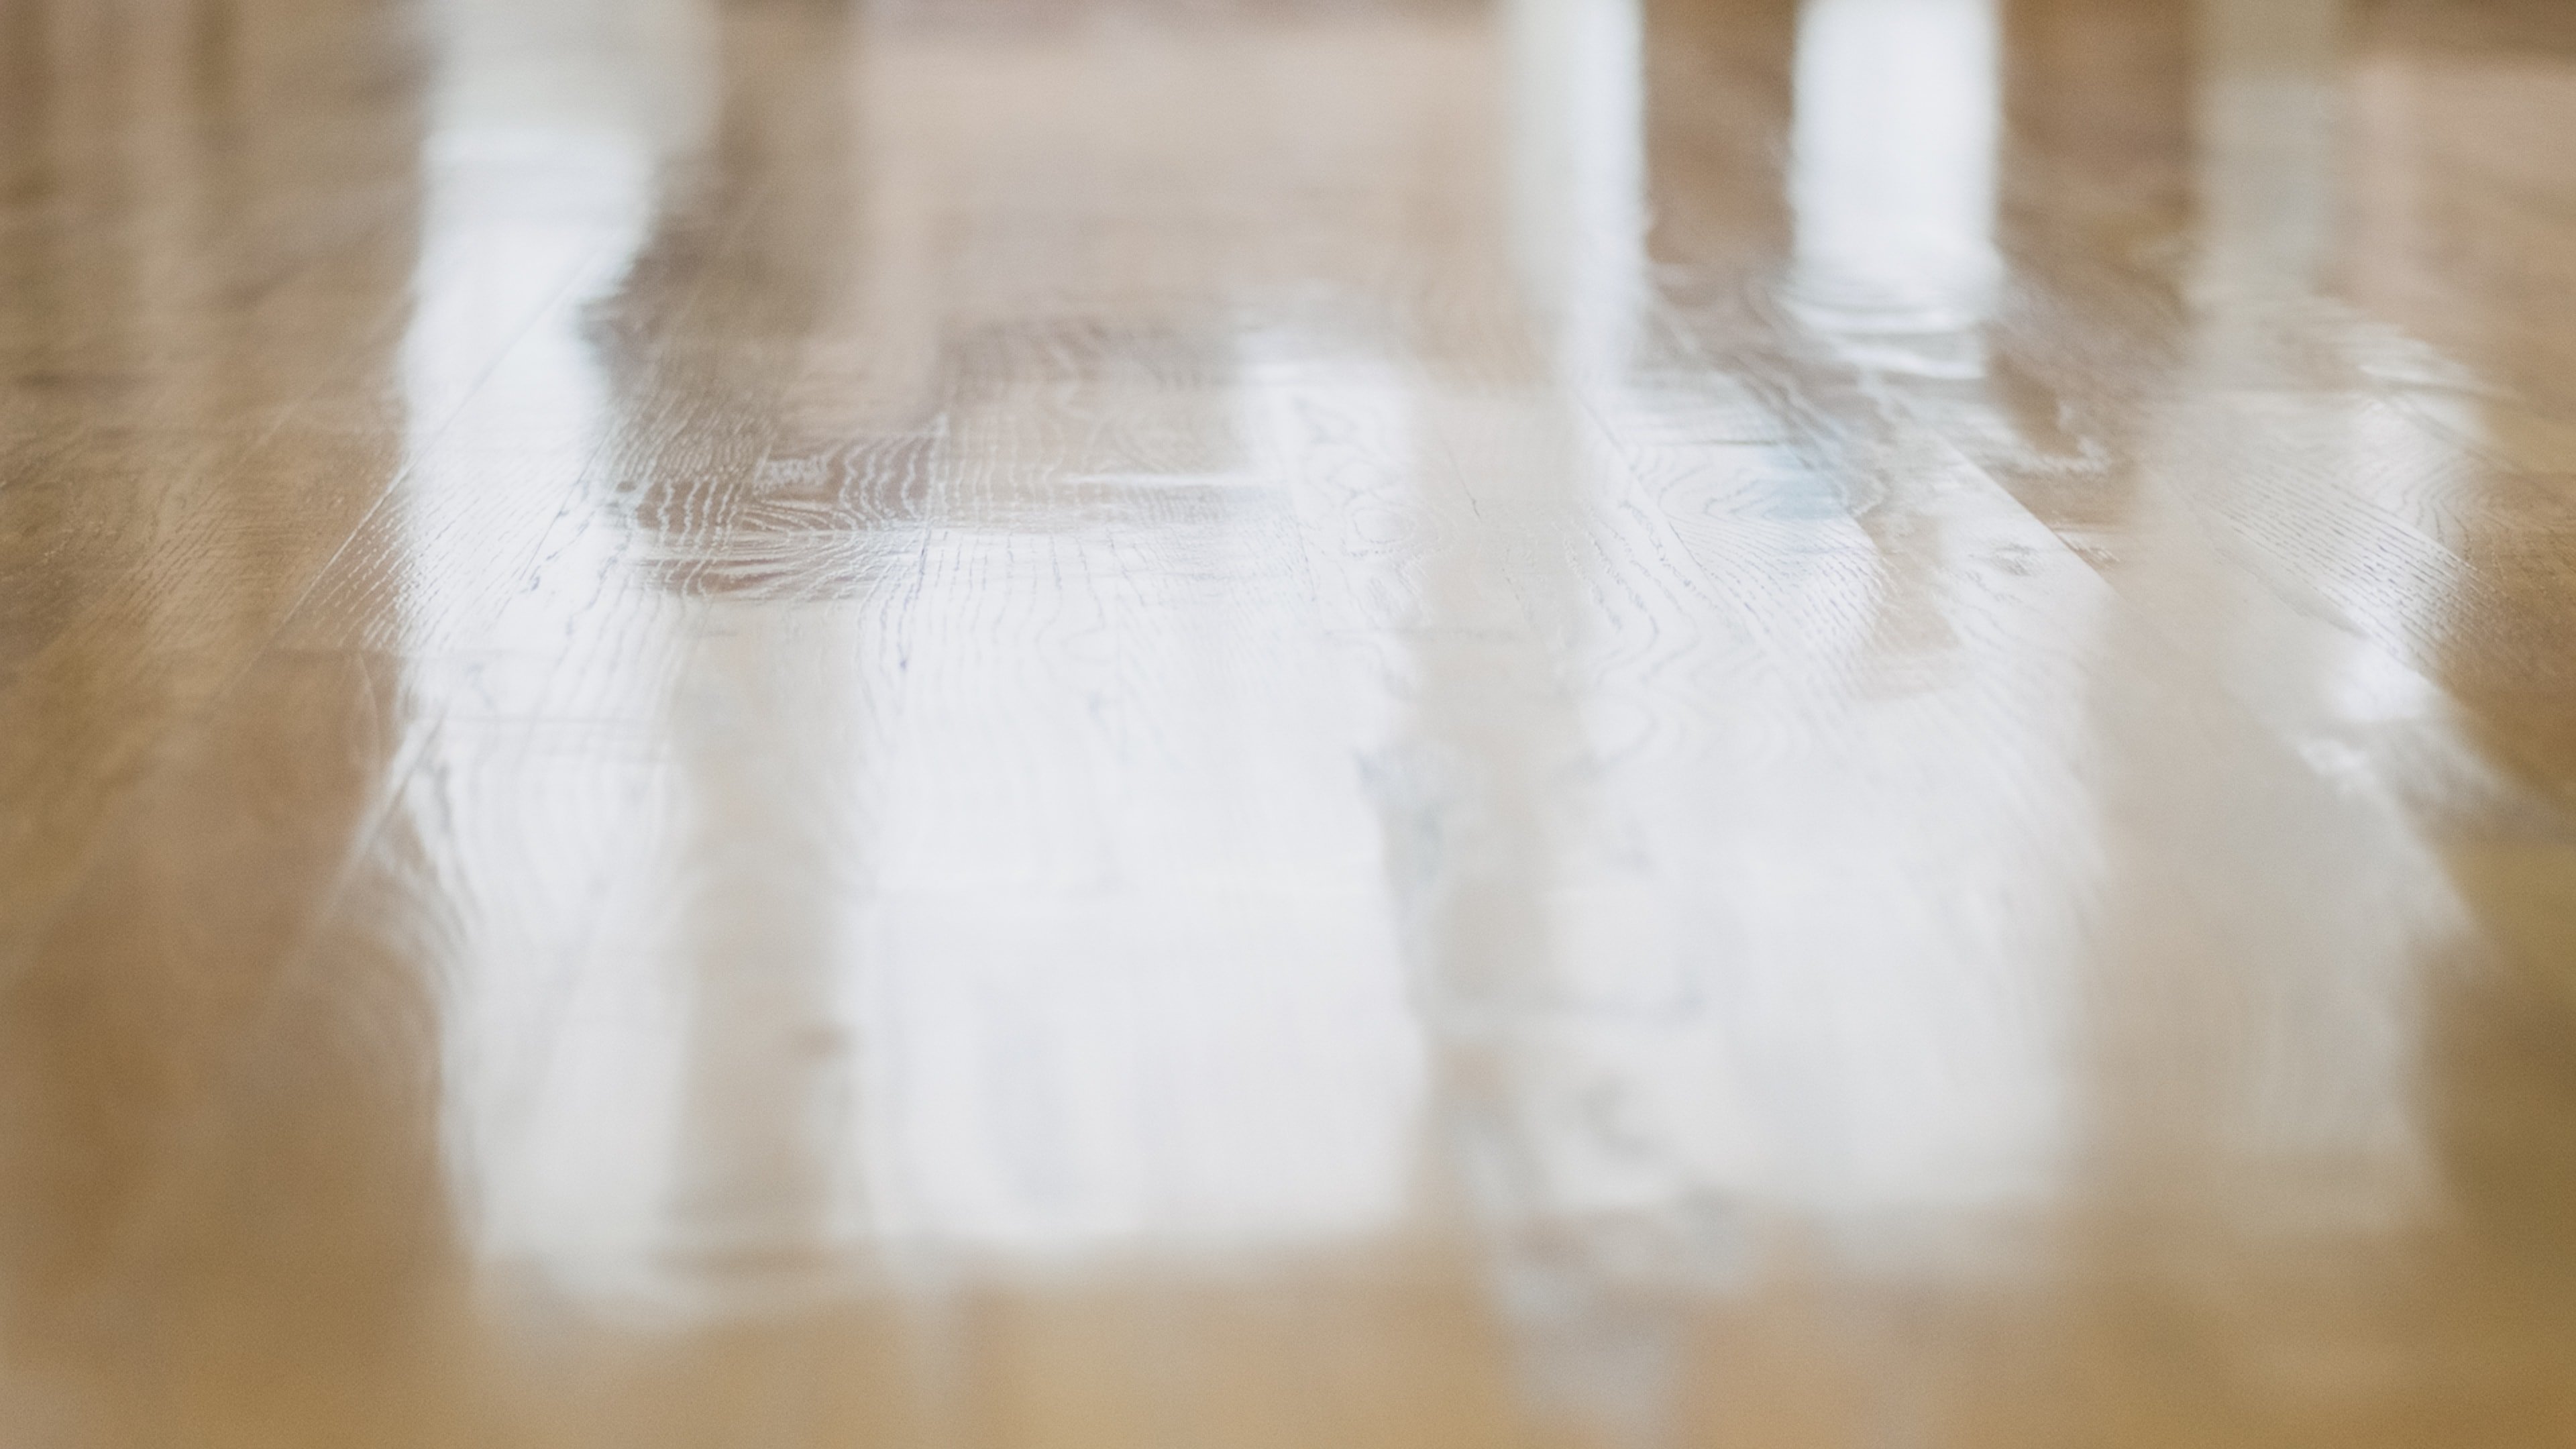 6 Best Wood & Wood Floor Cleaners To Make It Shine